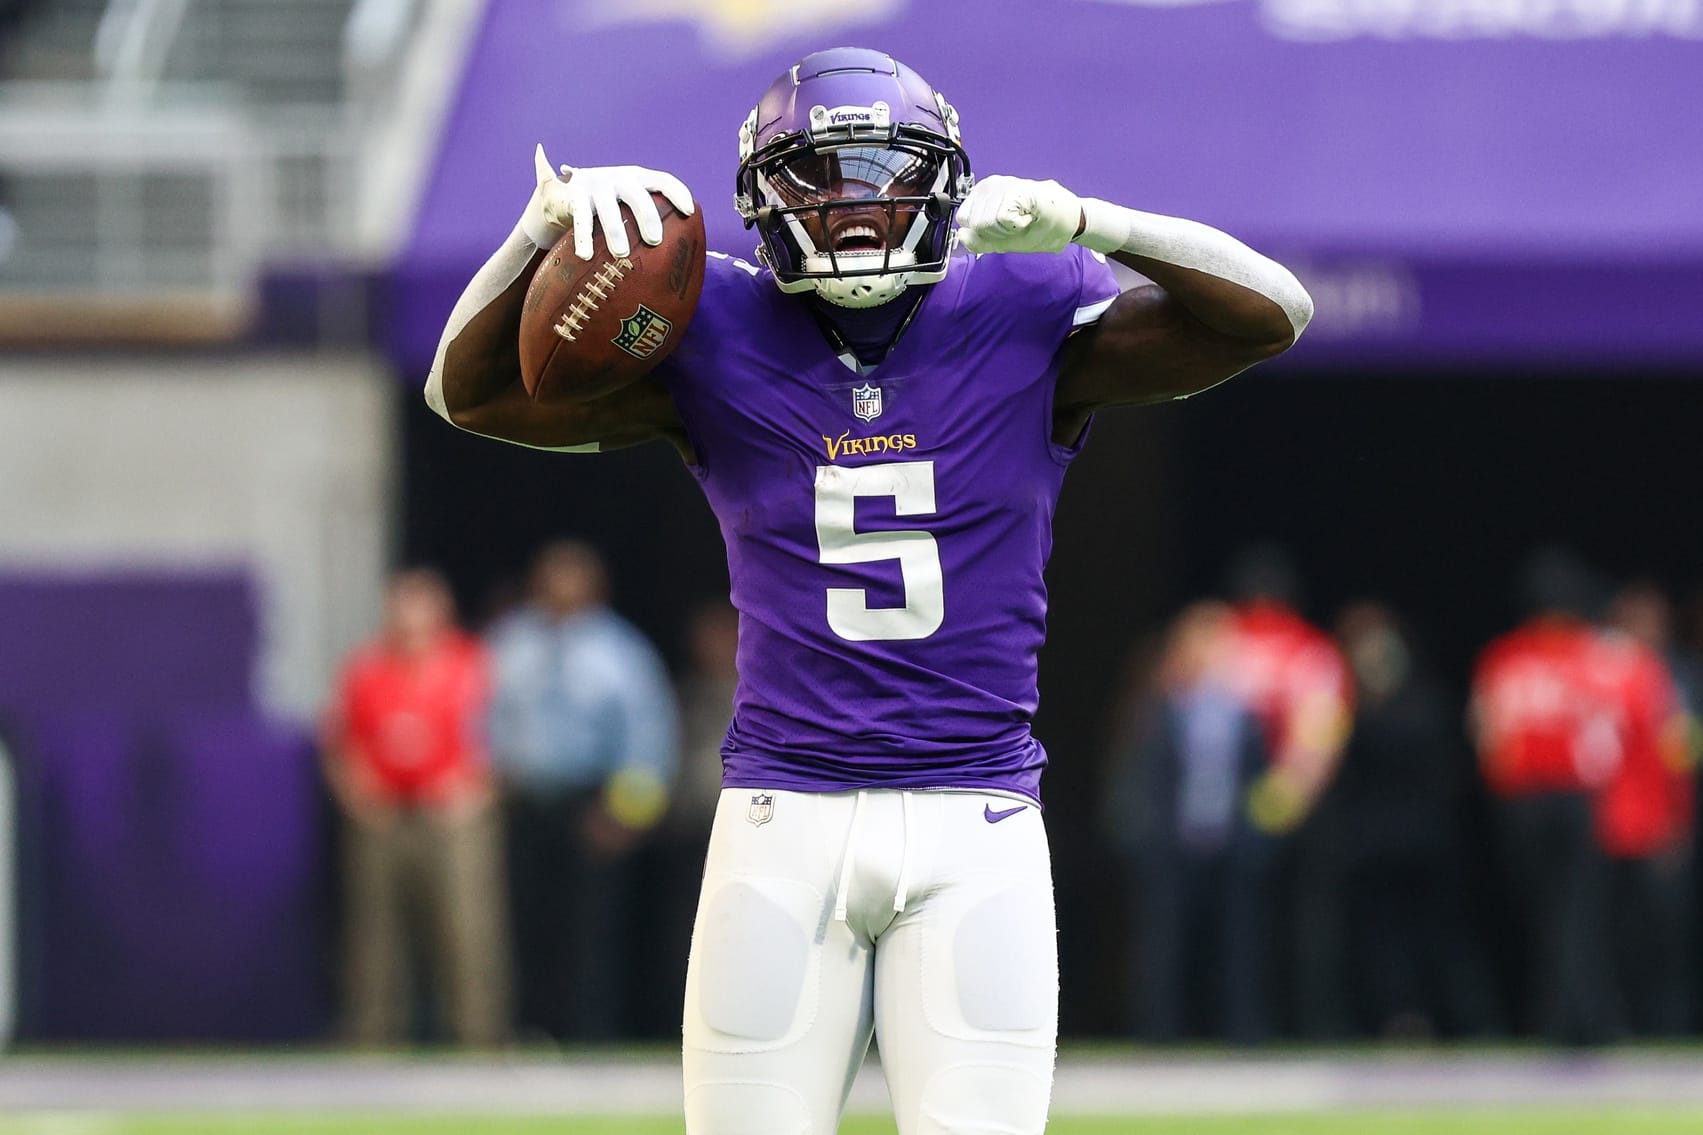 Vikings Broadcasters were Disgusted with Jalen Reagor